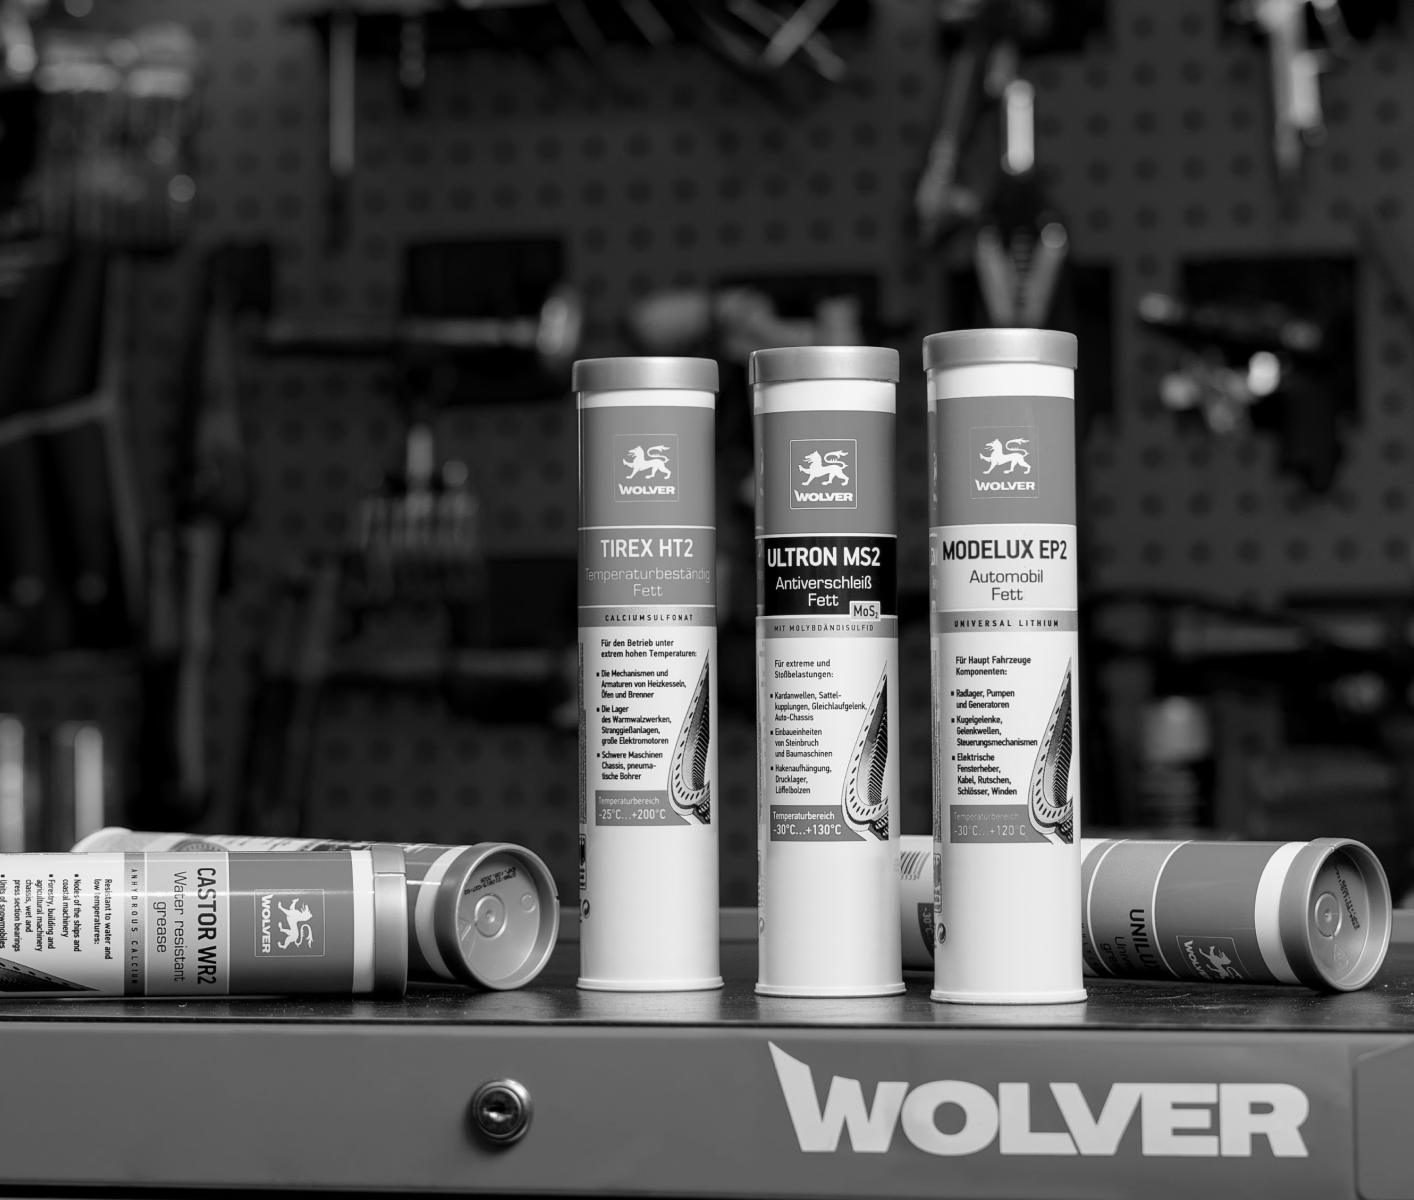 Wolver - motor oil. Made in Germany.